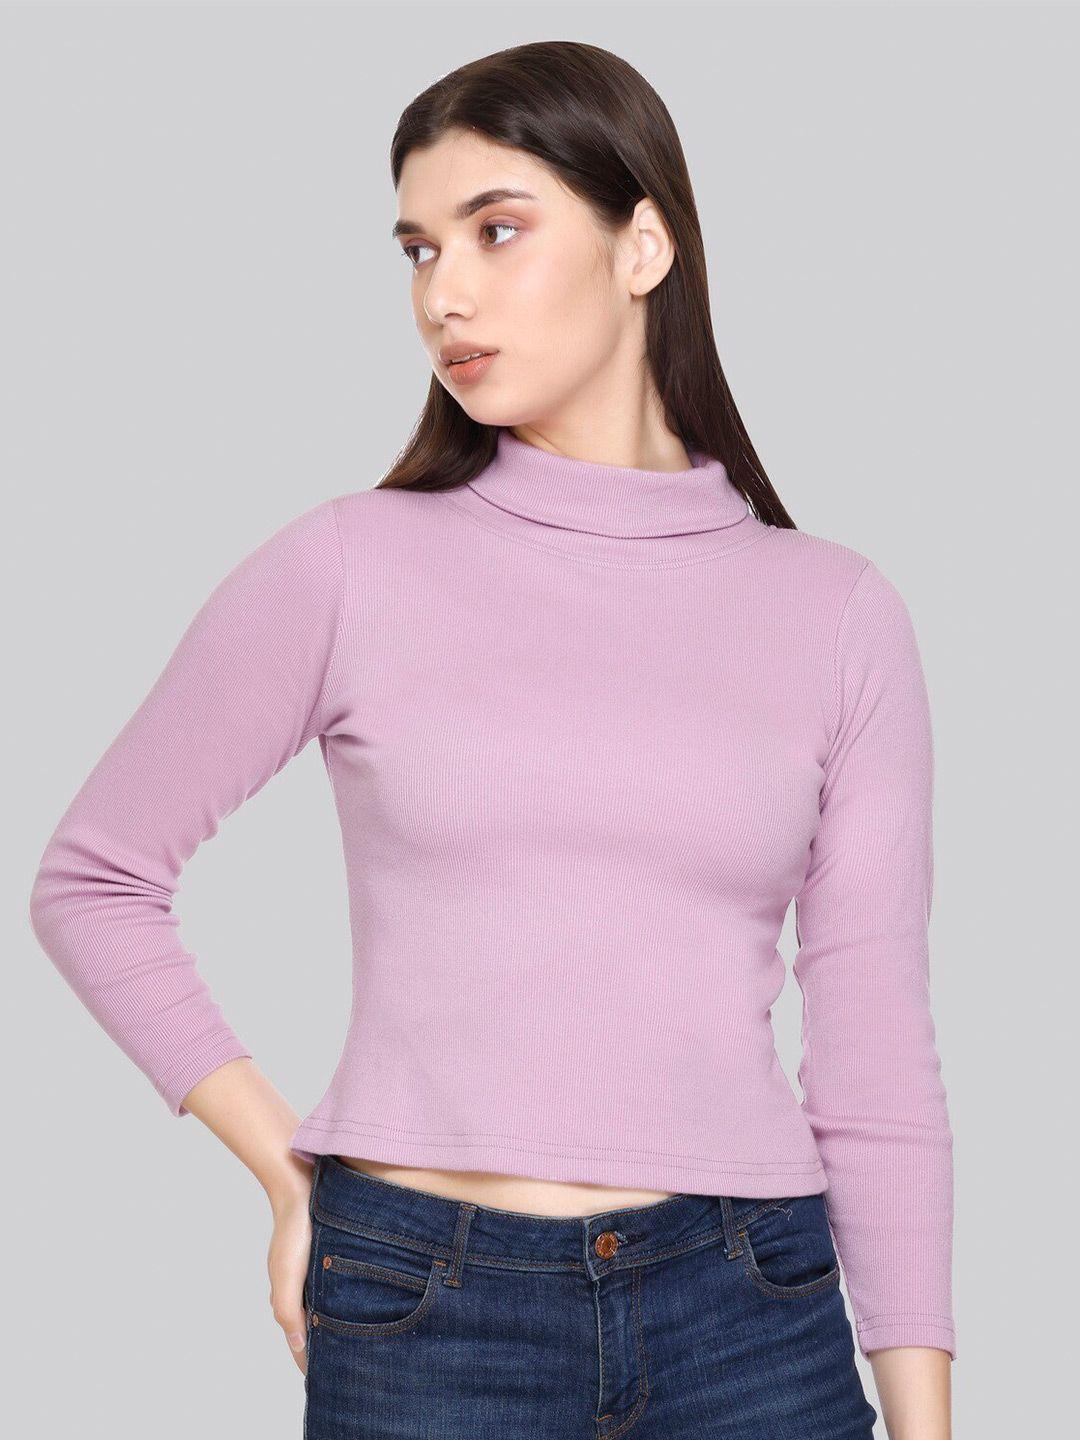 plush push the fashion turtl neck fitted top